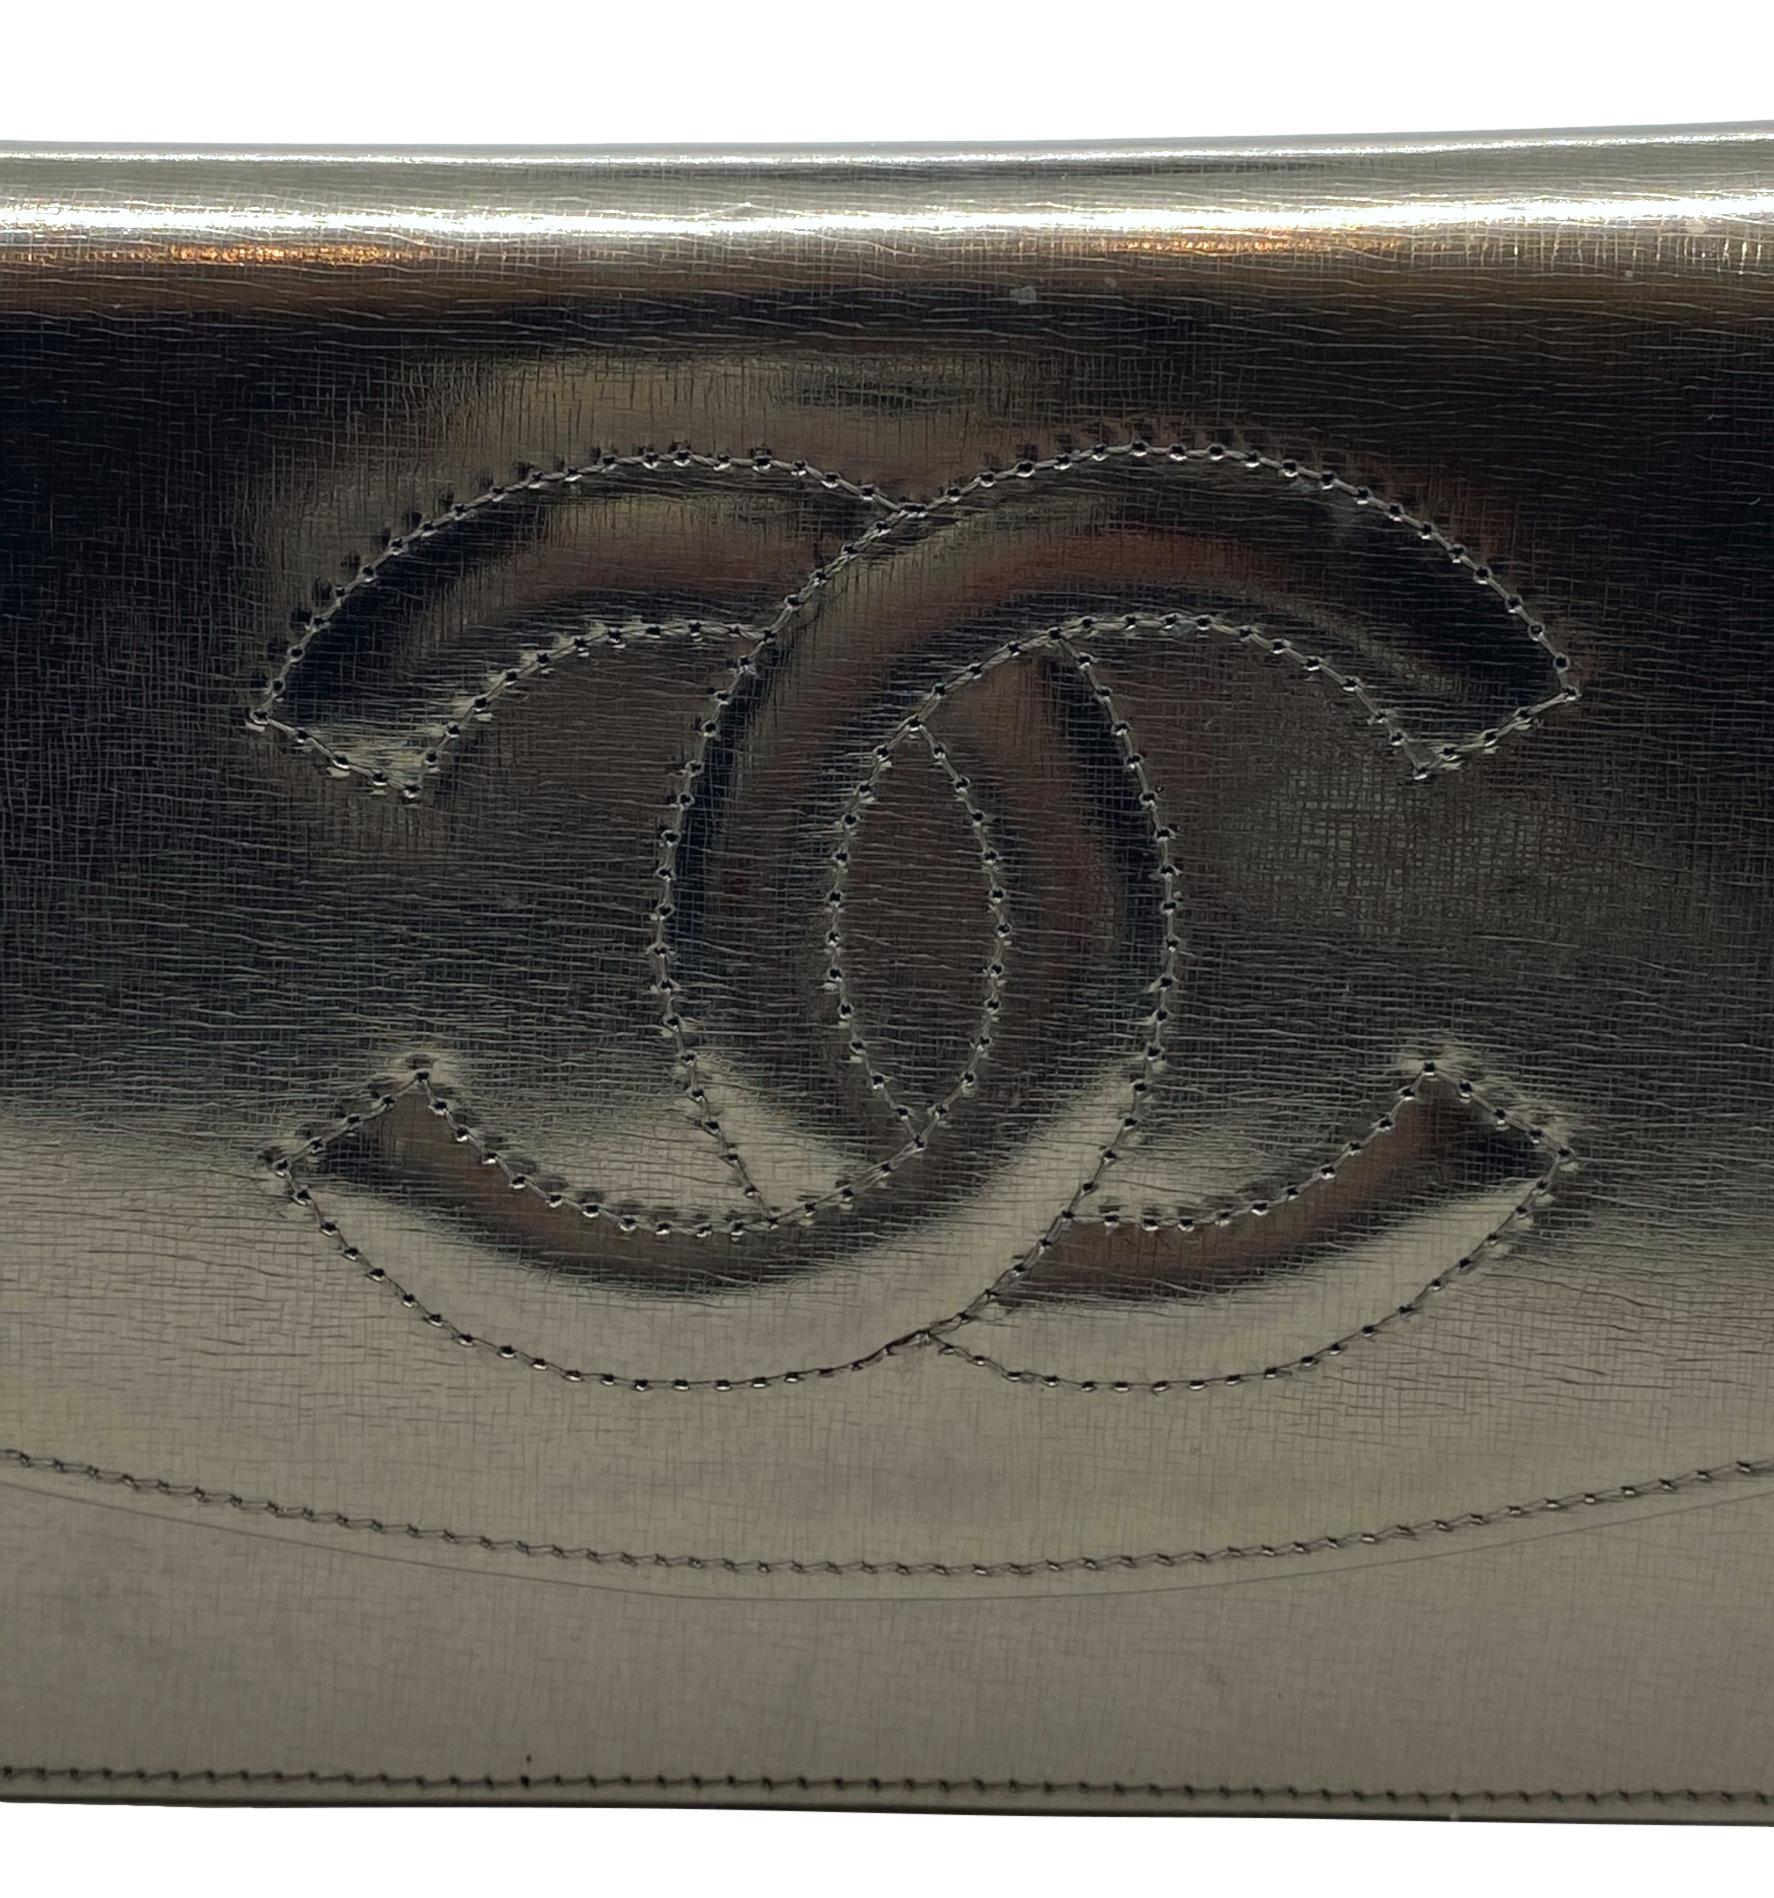 Chanel Timeless Metallic Leather Wallet on Chain Shoulder Clutch Bag, 2008. 5